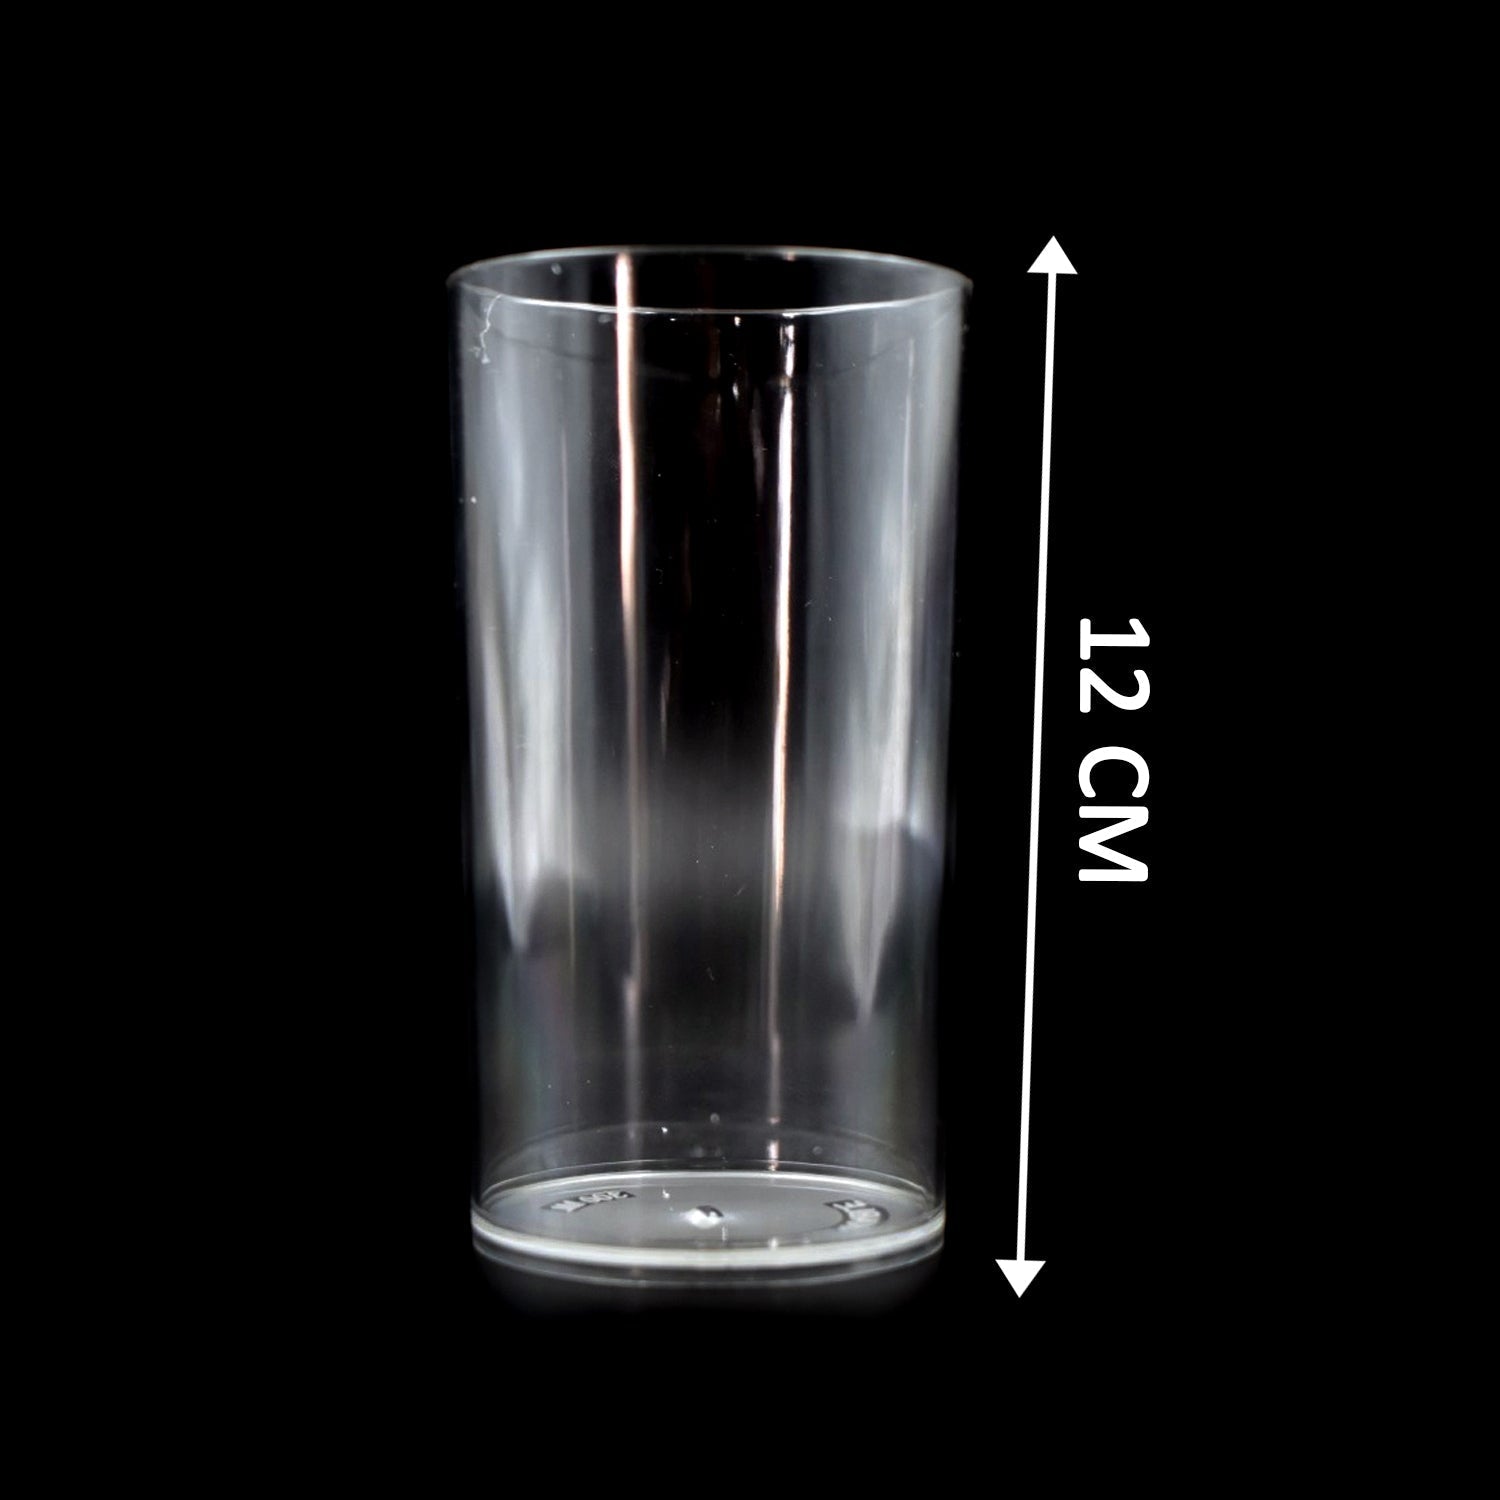 2027A 6 Pcs Large Plastic Glass 300Ml used in all kinds of kitchen and official purposes for drinking water and beverages etc.